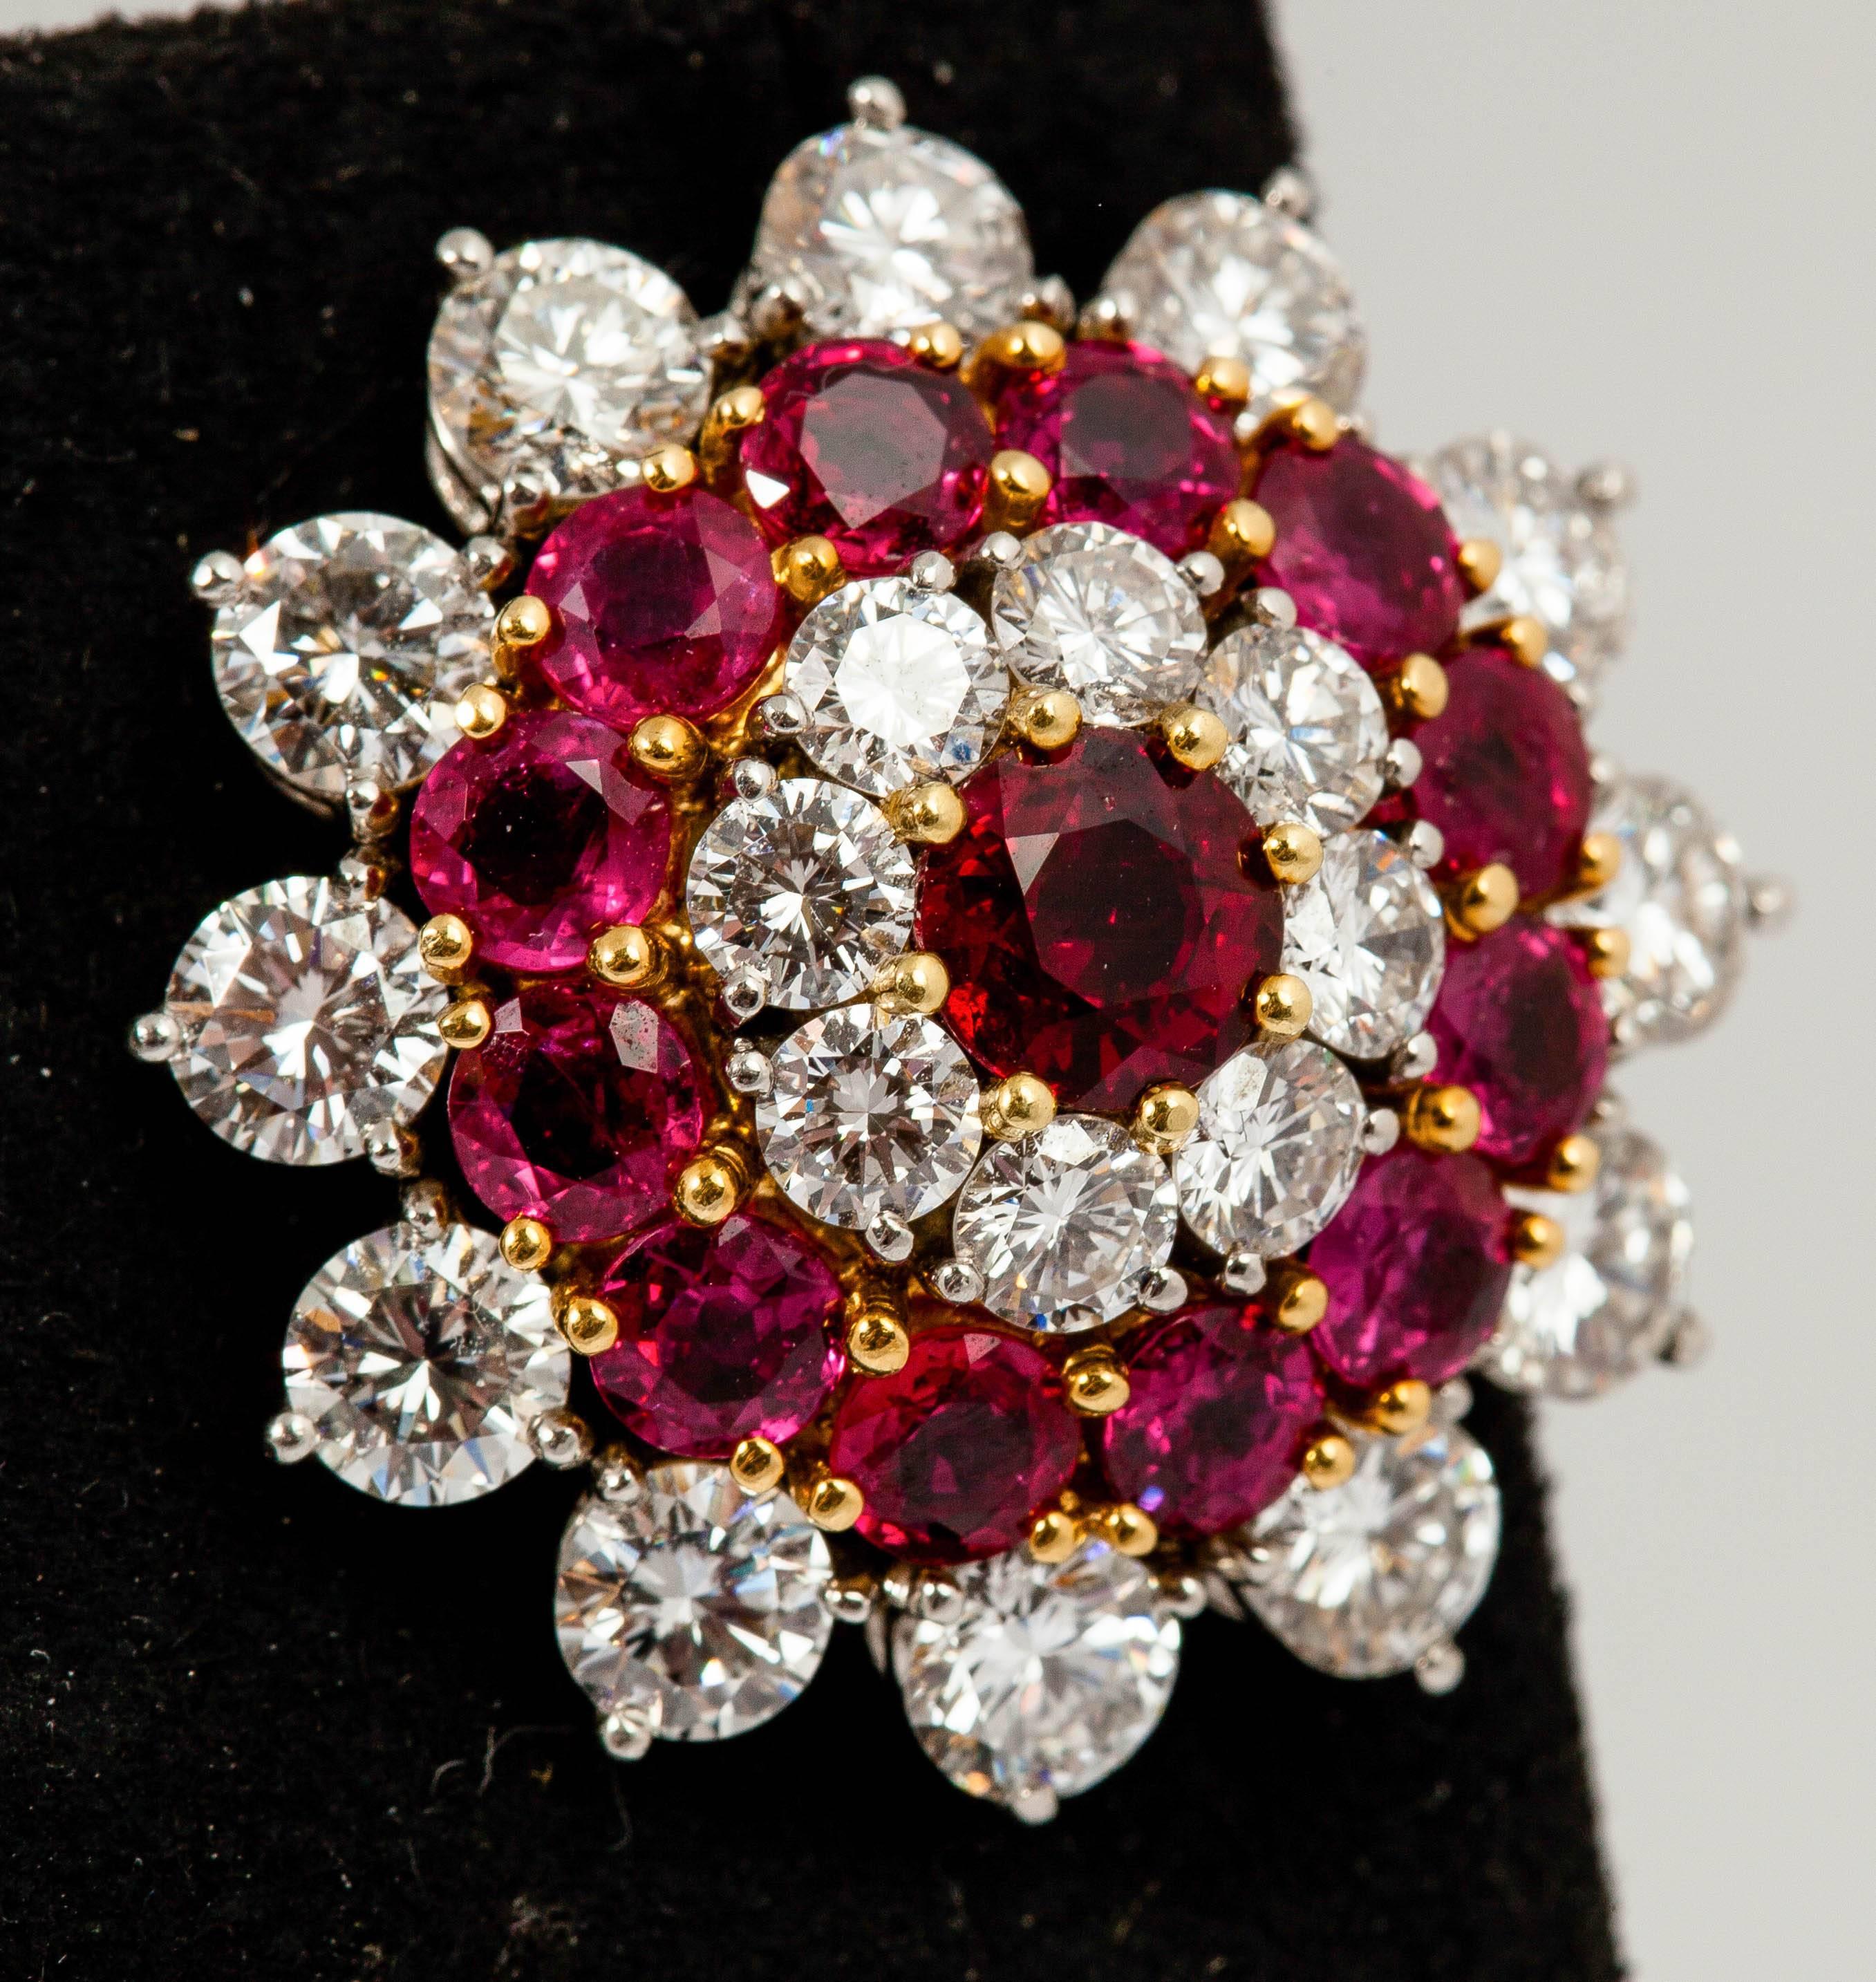 Designed as a stylized flower, set with  Rubies weighing 11.00 cts and brilliant cut diamonds weighing 10.00 cts, mounted in platinum and 18k yellow gold.